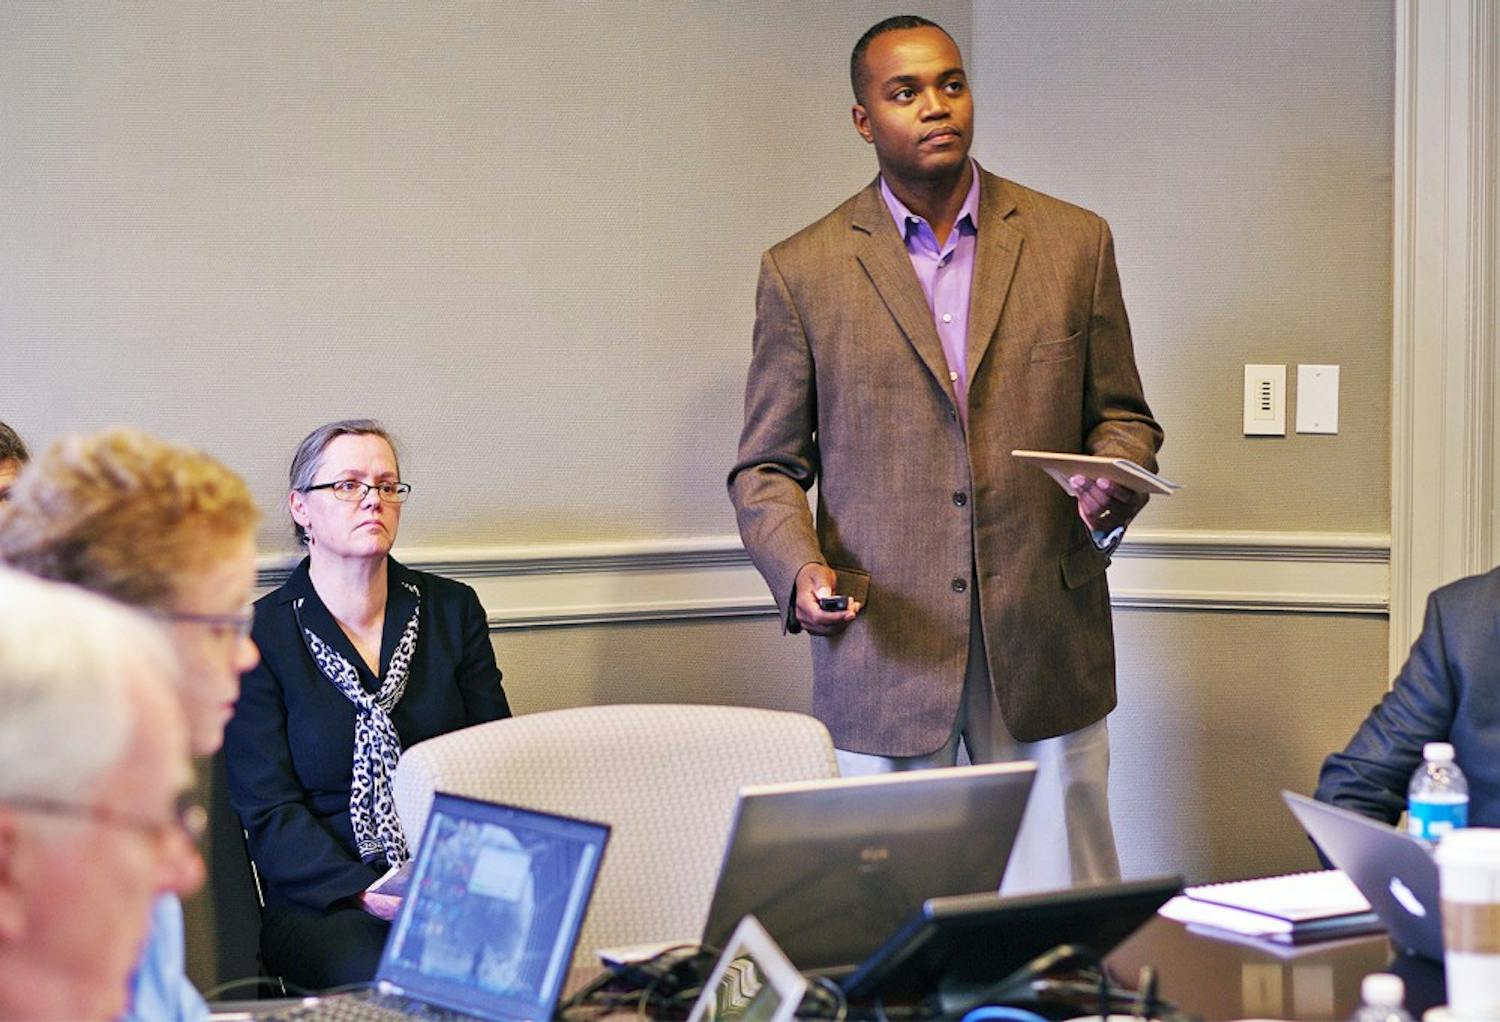 Associate Professor at North Carolina Central University Antonio Baines (right), speaks at the Faculty Executive meeting on Monday.